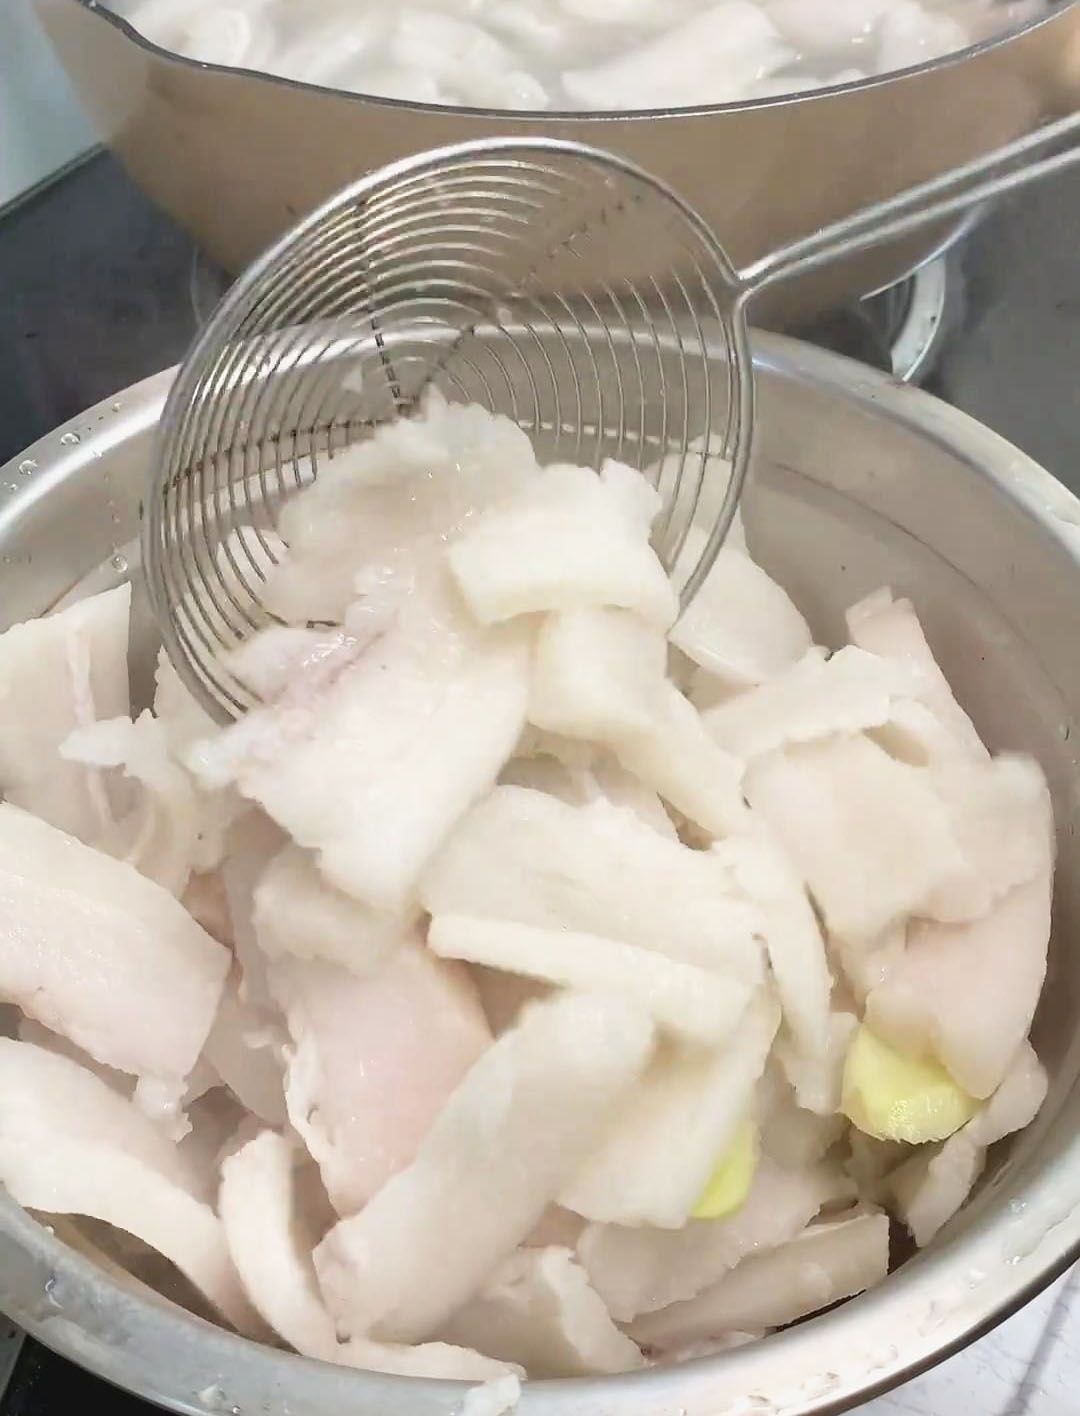 remove the blanched pork fat and drain the water